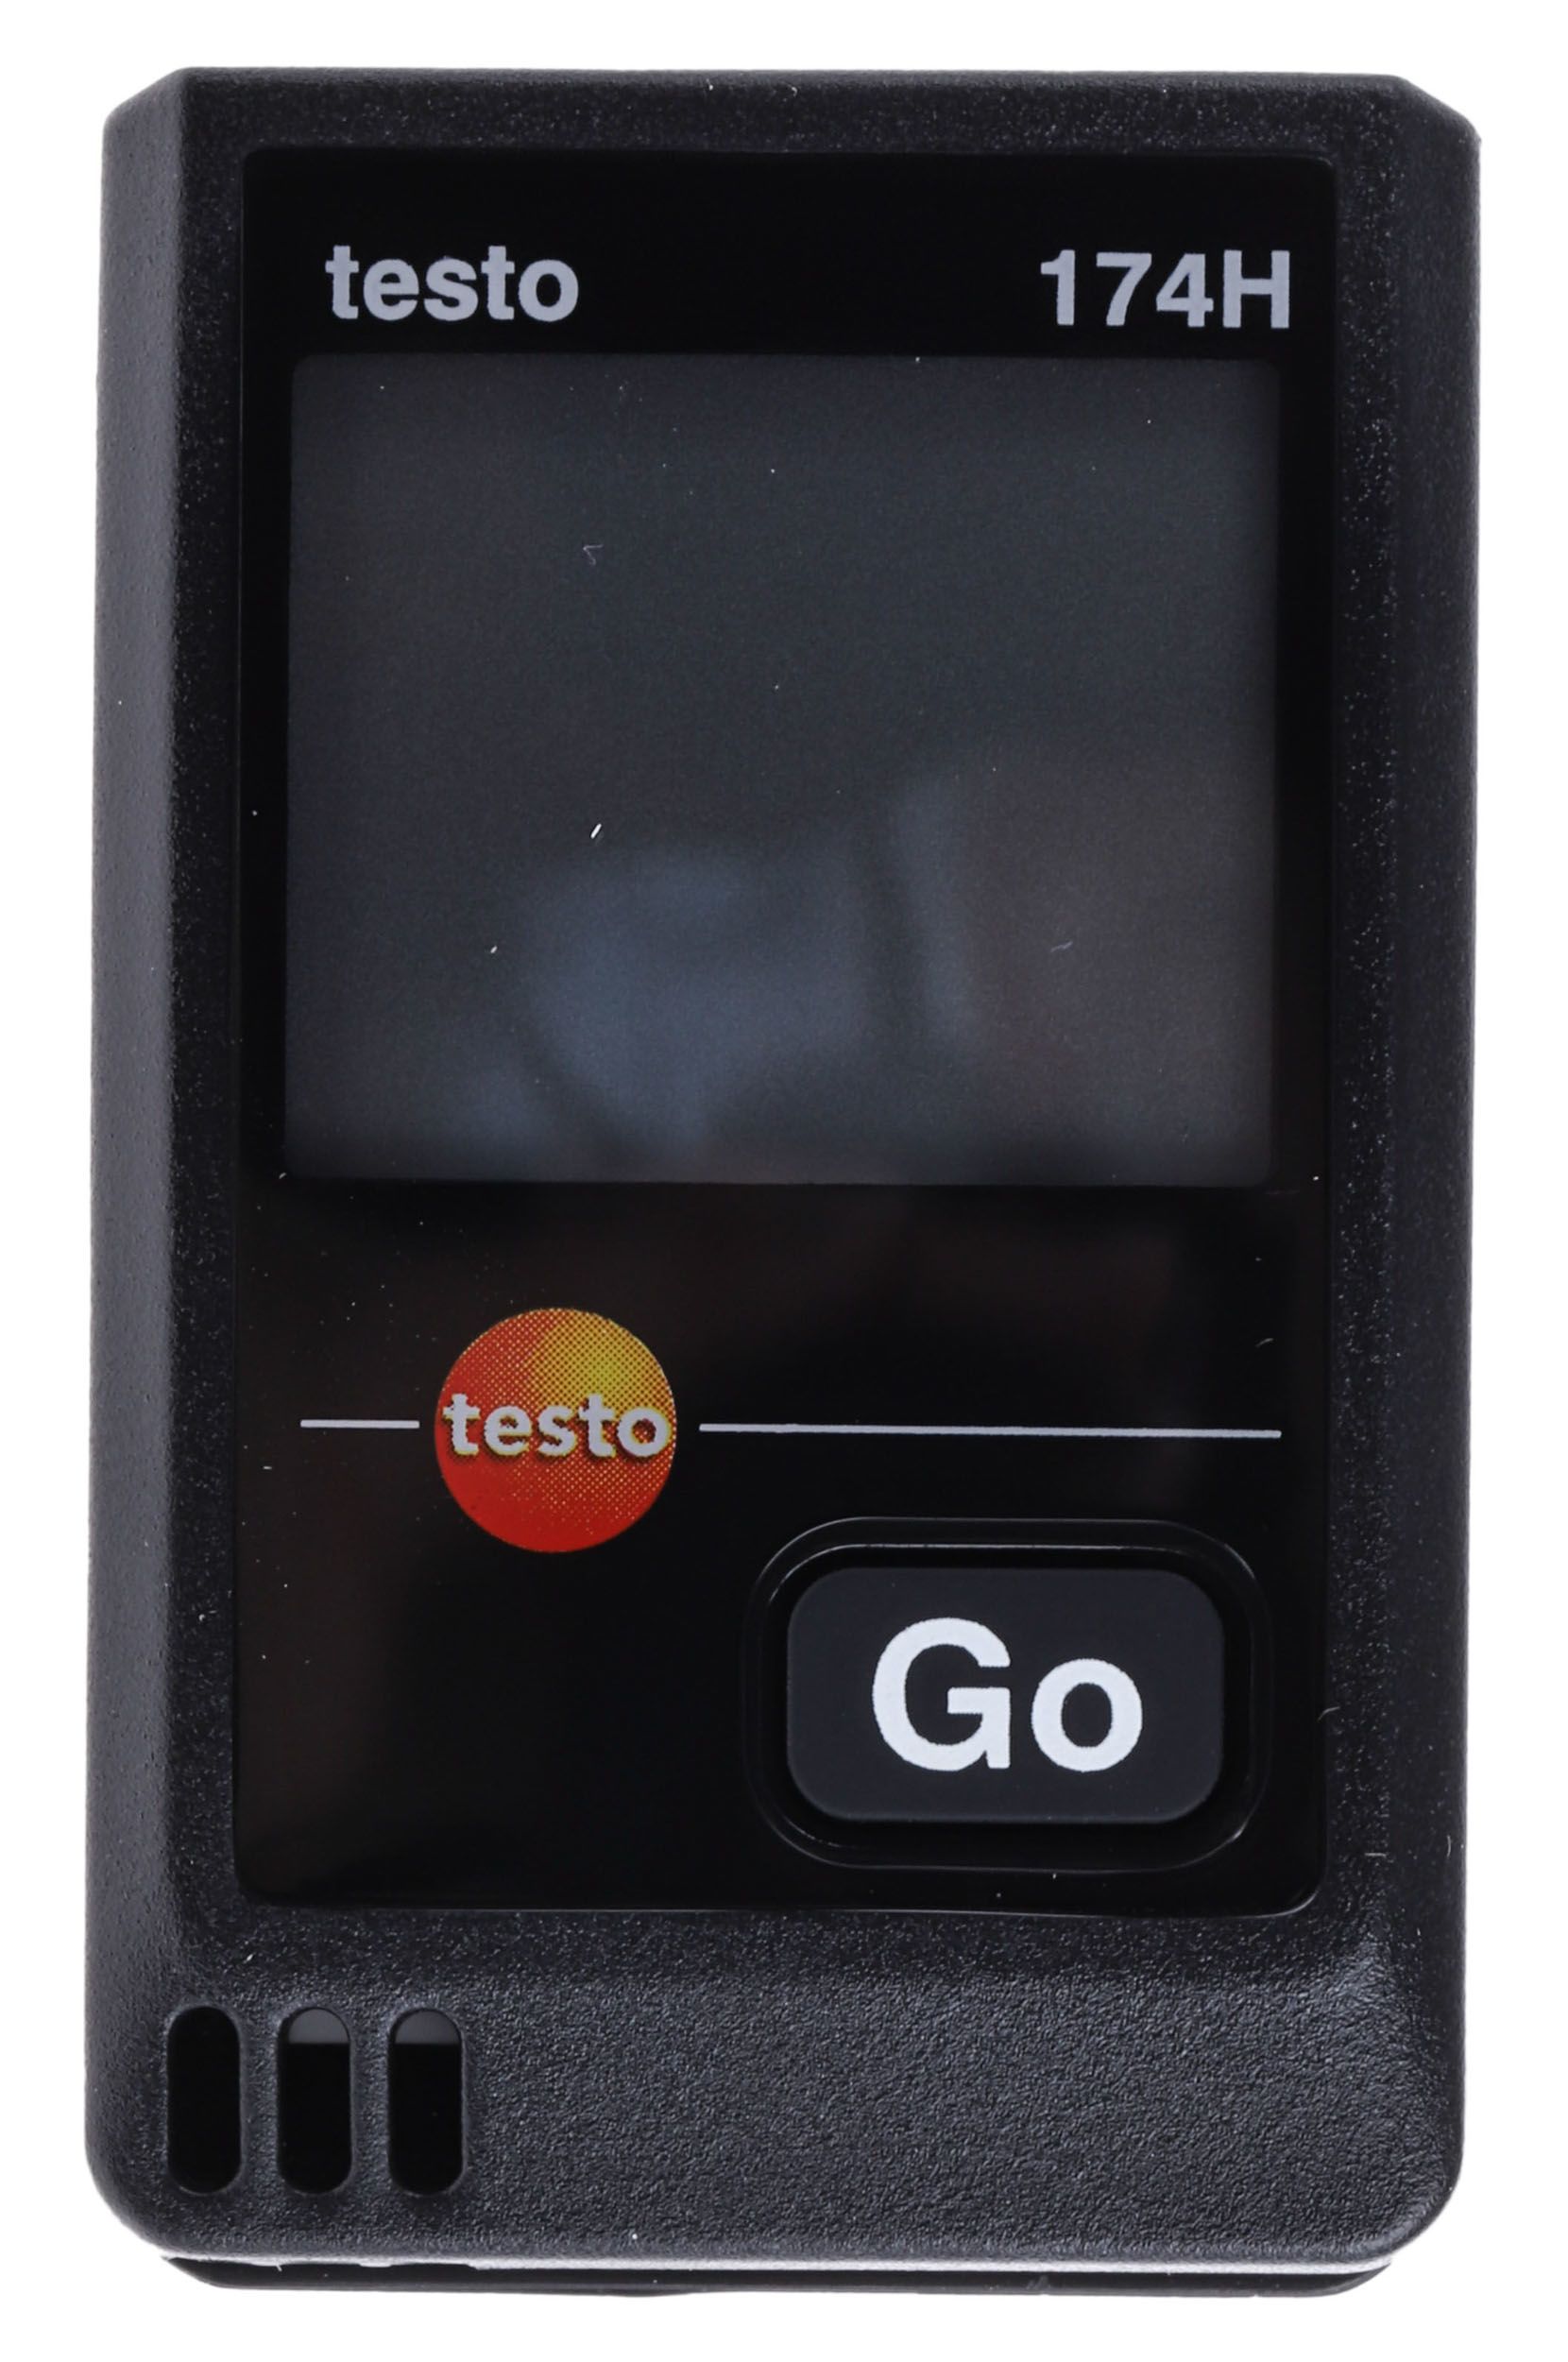 Testo 174H Temperature & Humidity Data Logger, 2 Input Channel(s), Battery-Powered